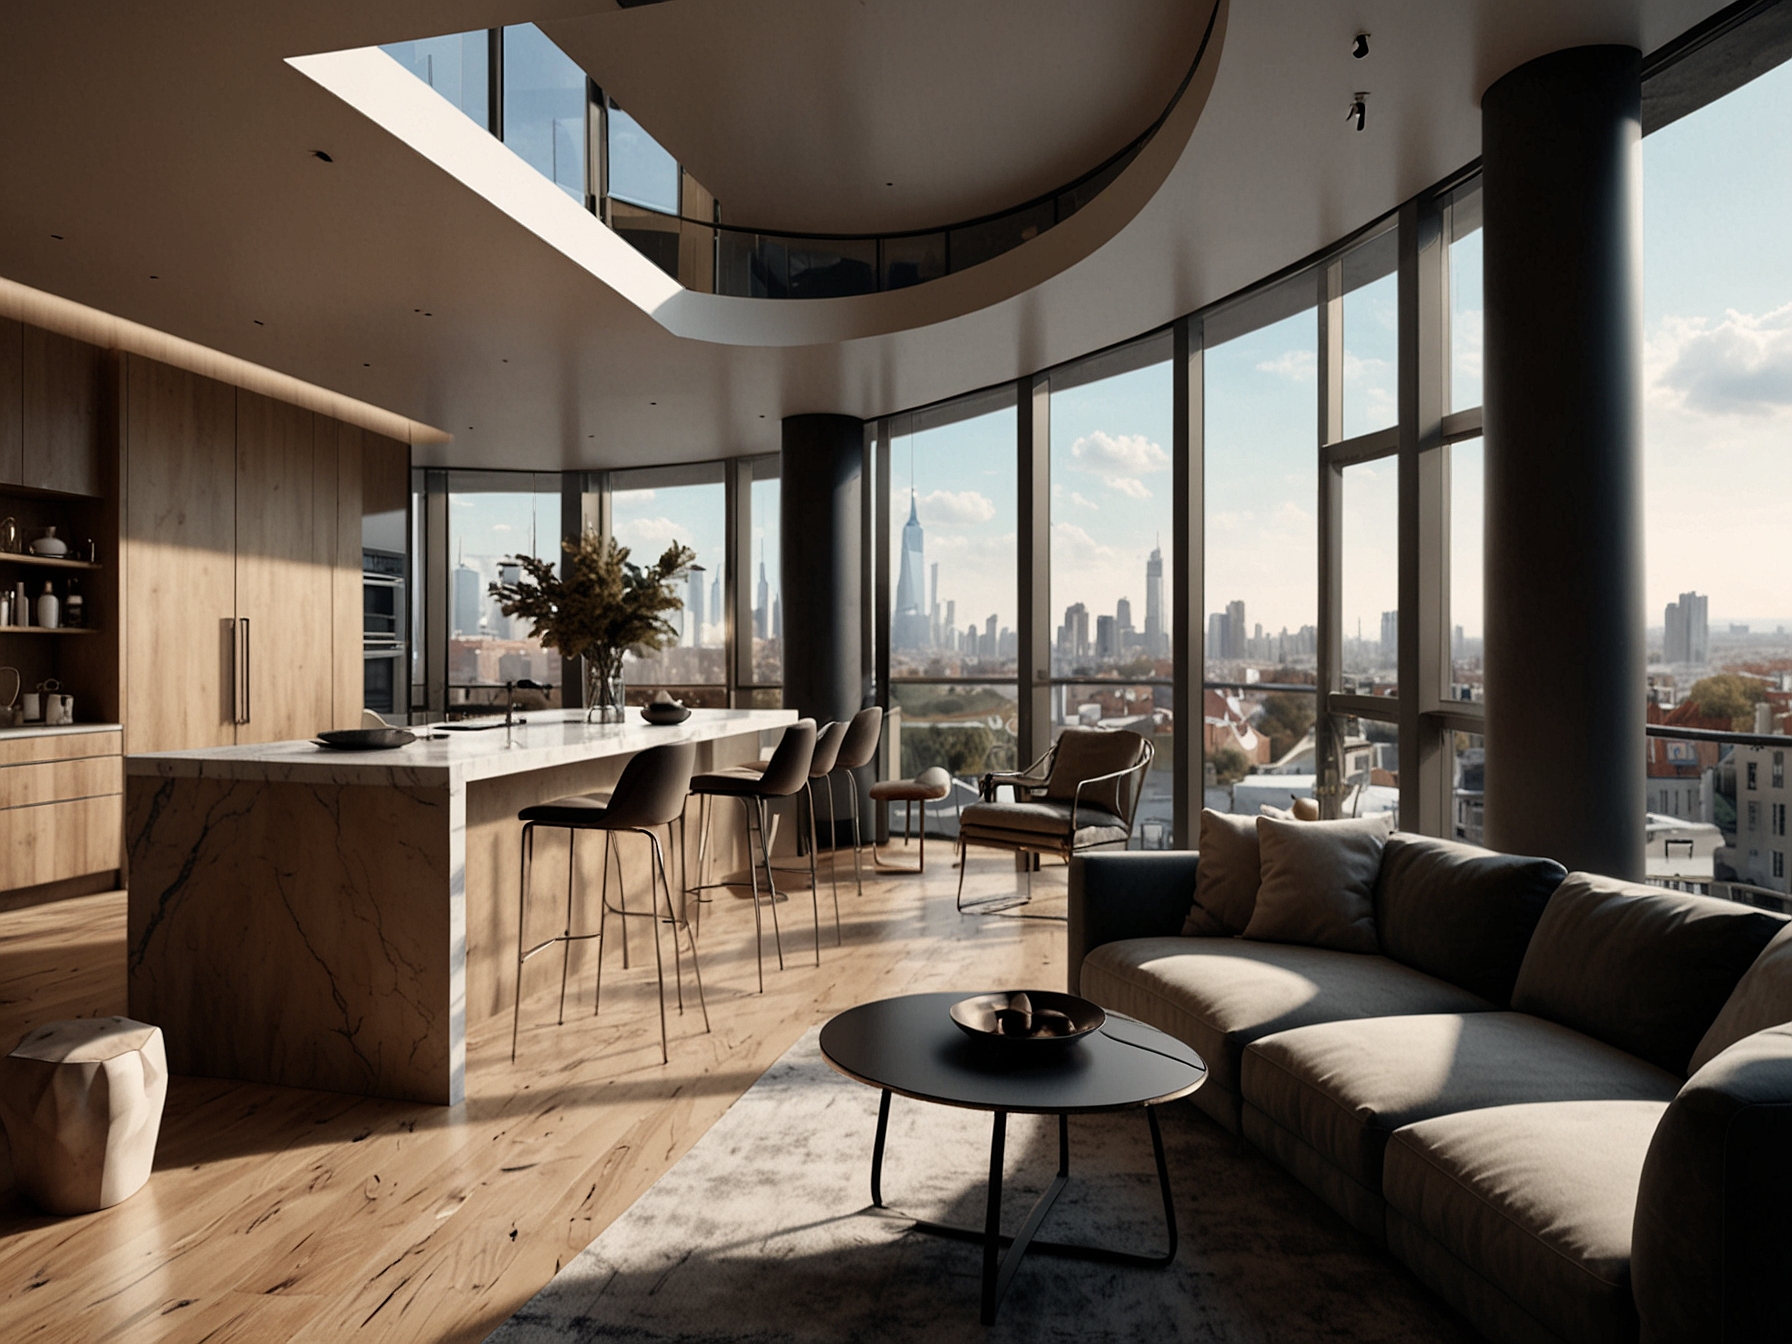 Interior of the luxurious penthouse, featuring a custom-designed kitchen, floor-to-ceiling windows, and a private rooftop terrace with scenic views.